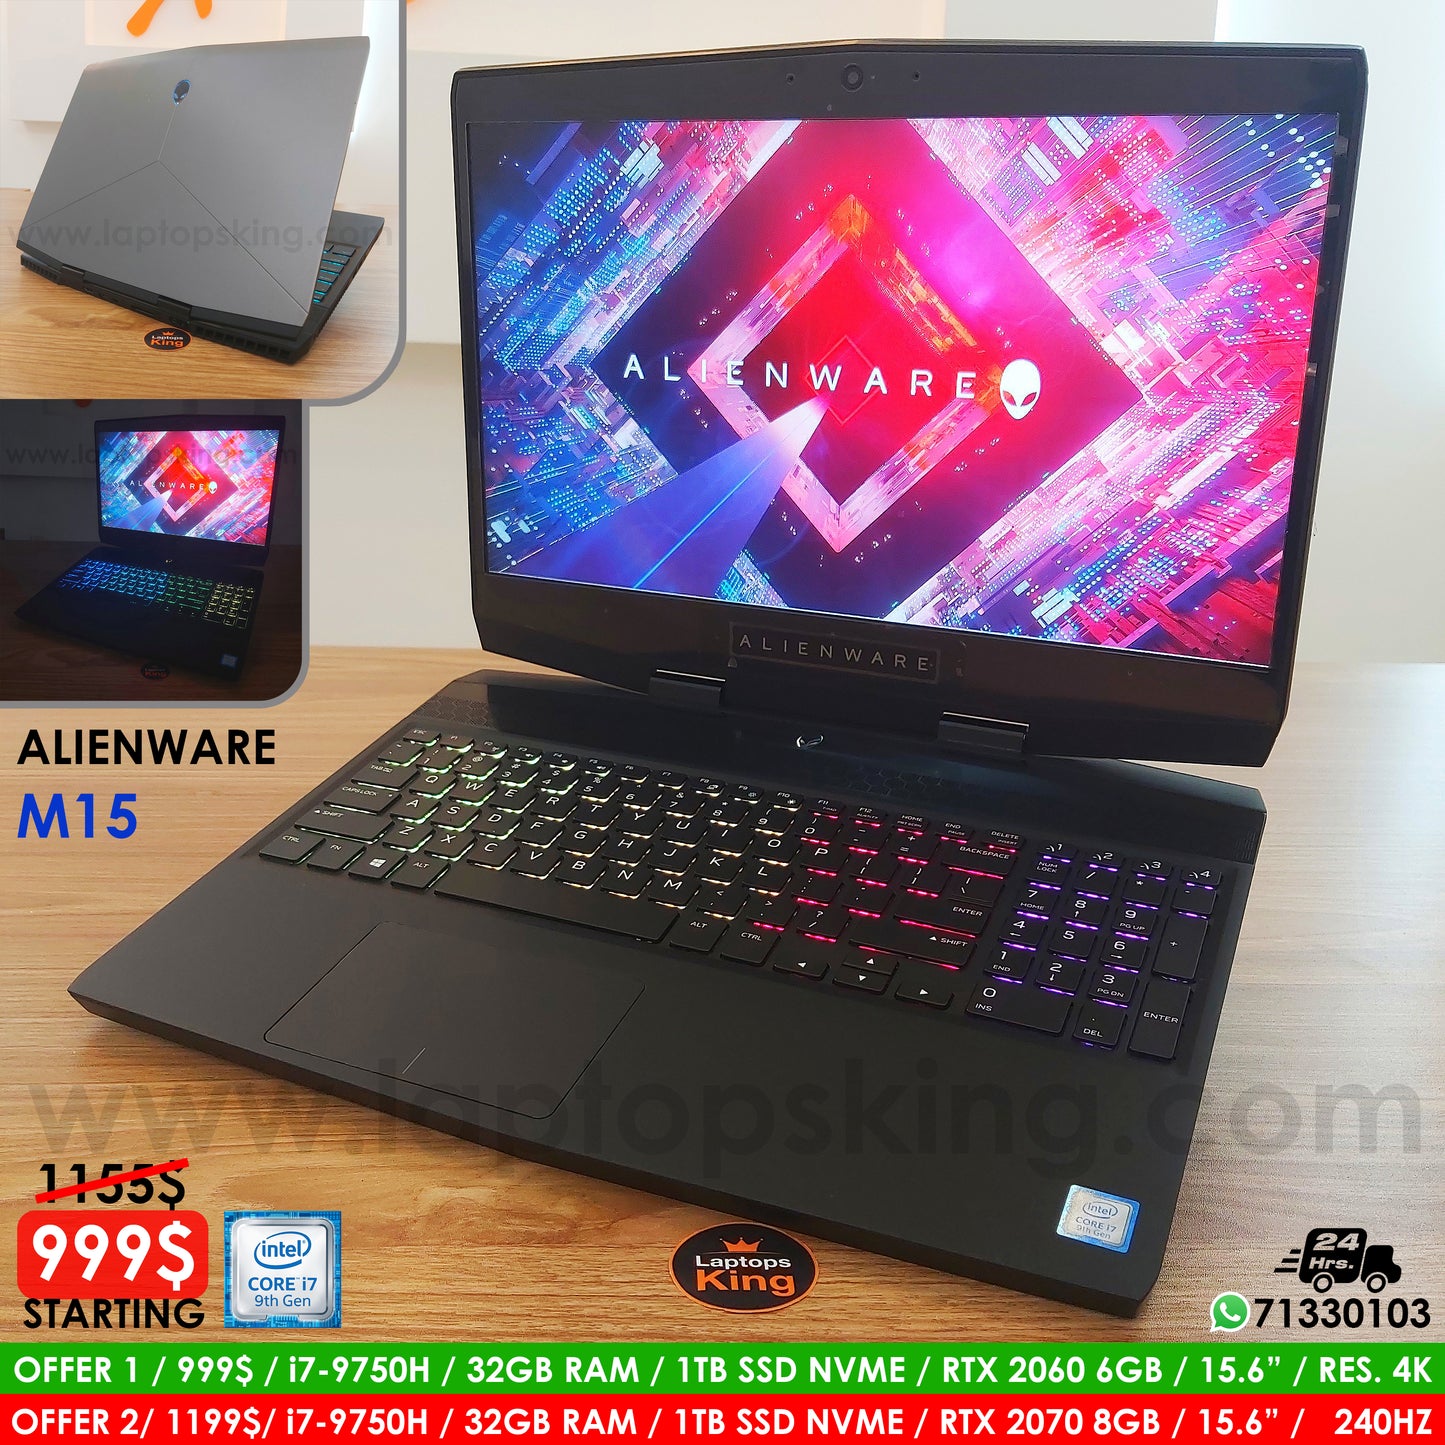 Alienware M15 Gaming Laptop Offers (Open Box) Gaming laptop, Graphic Design laptop, best laptop for gaming, best laptop for graphic design, computer for sale Lebanon, laptop for video editing in Lebanon, laptop for sale Lebanon, best graphic design laptop,	best video editing laptop, best programming laptop, laptop for sale in Lebanon, laptops for sale in Lebanon, laptop for sale in Lebanon, buy computer Lebanon, buy laptop Lebanon.